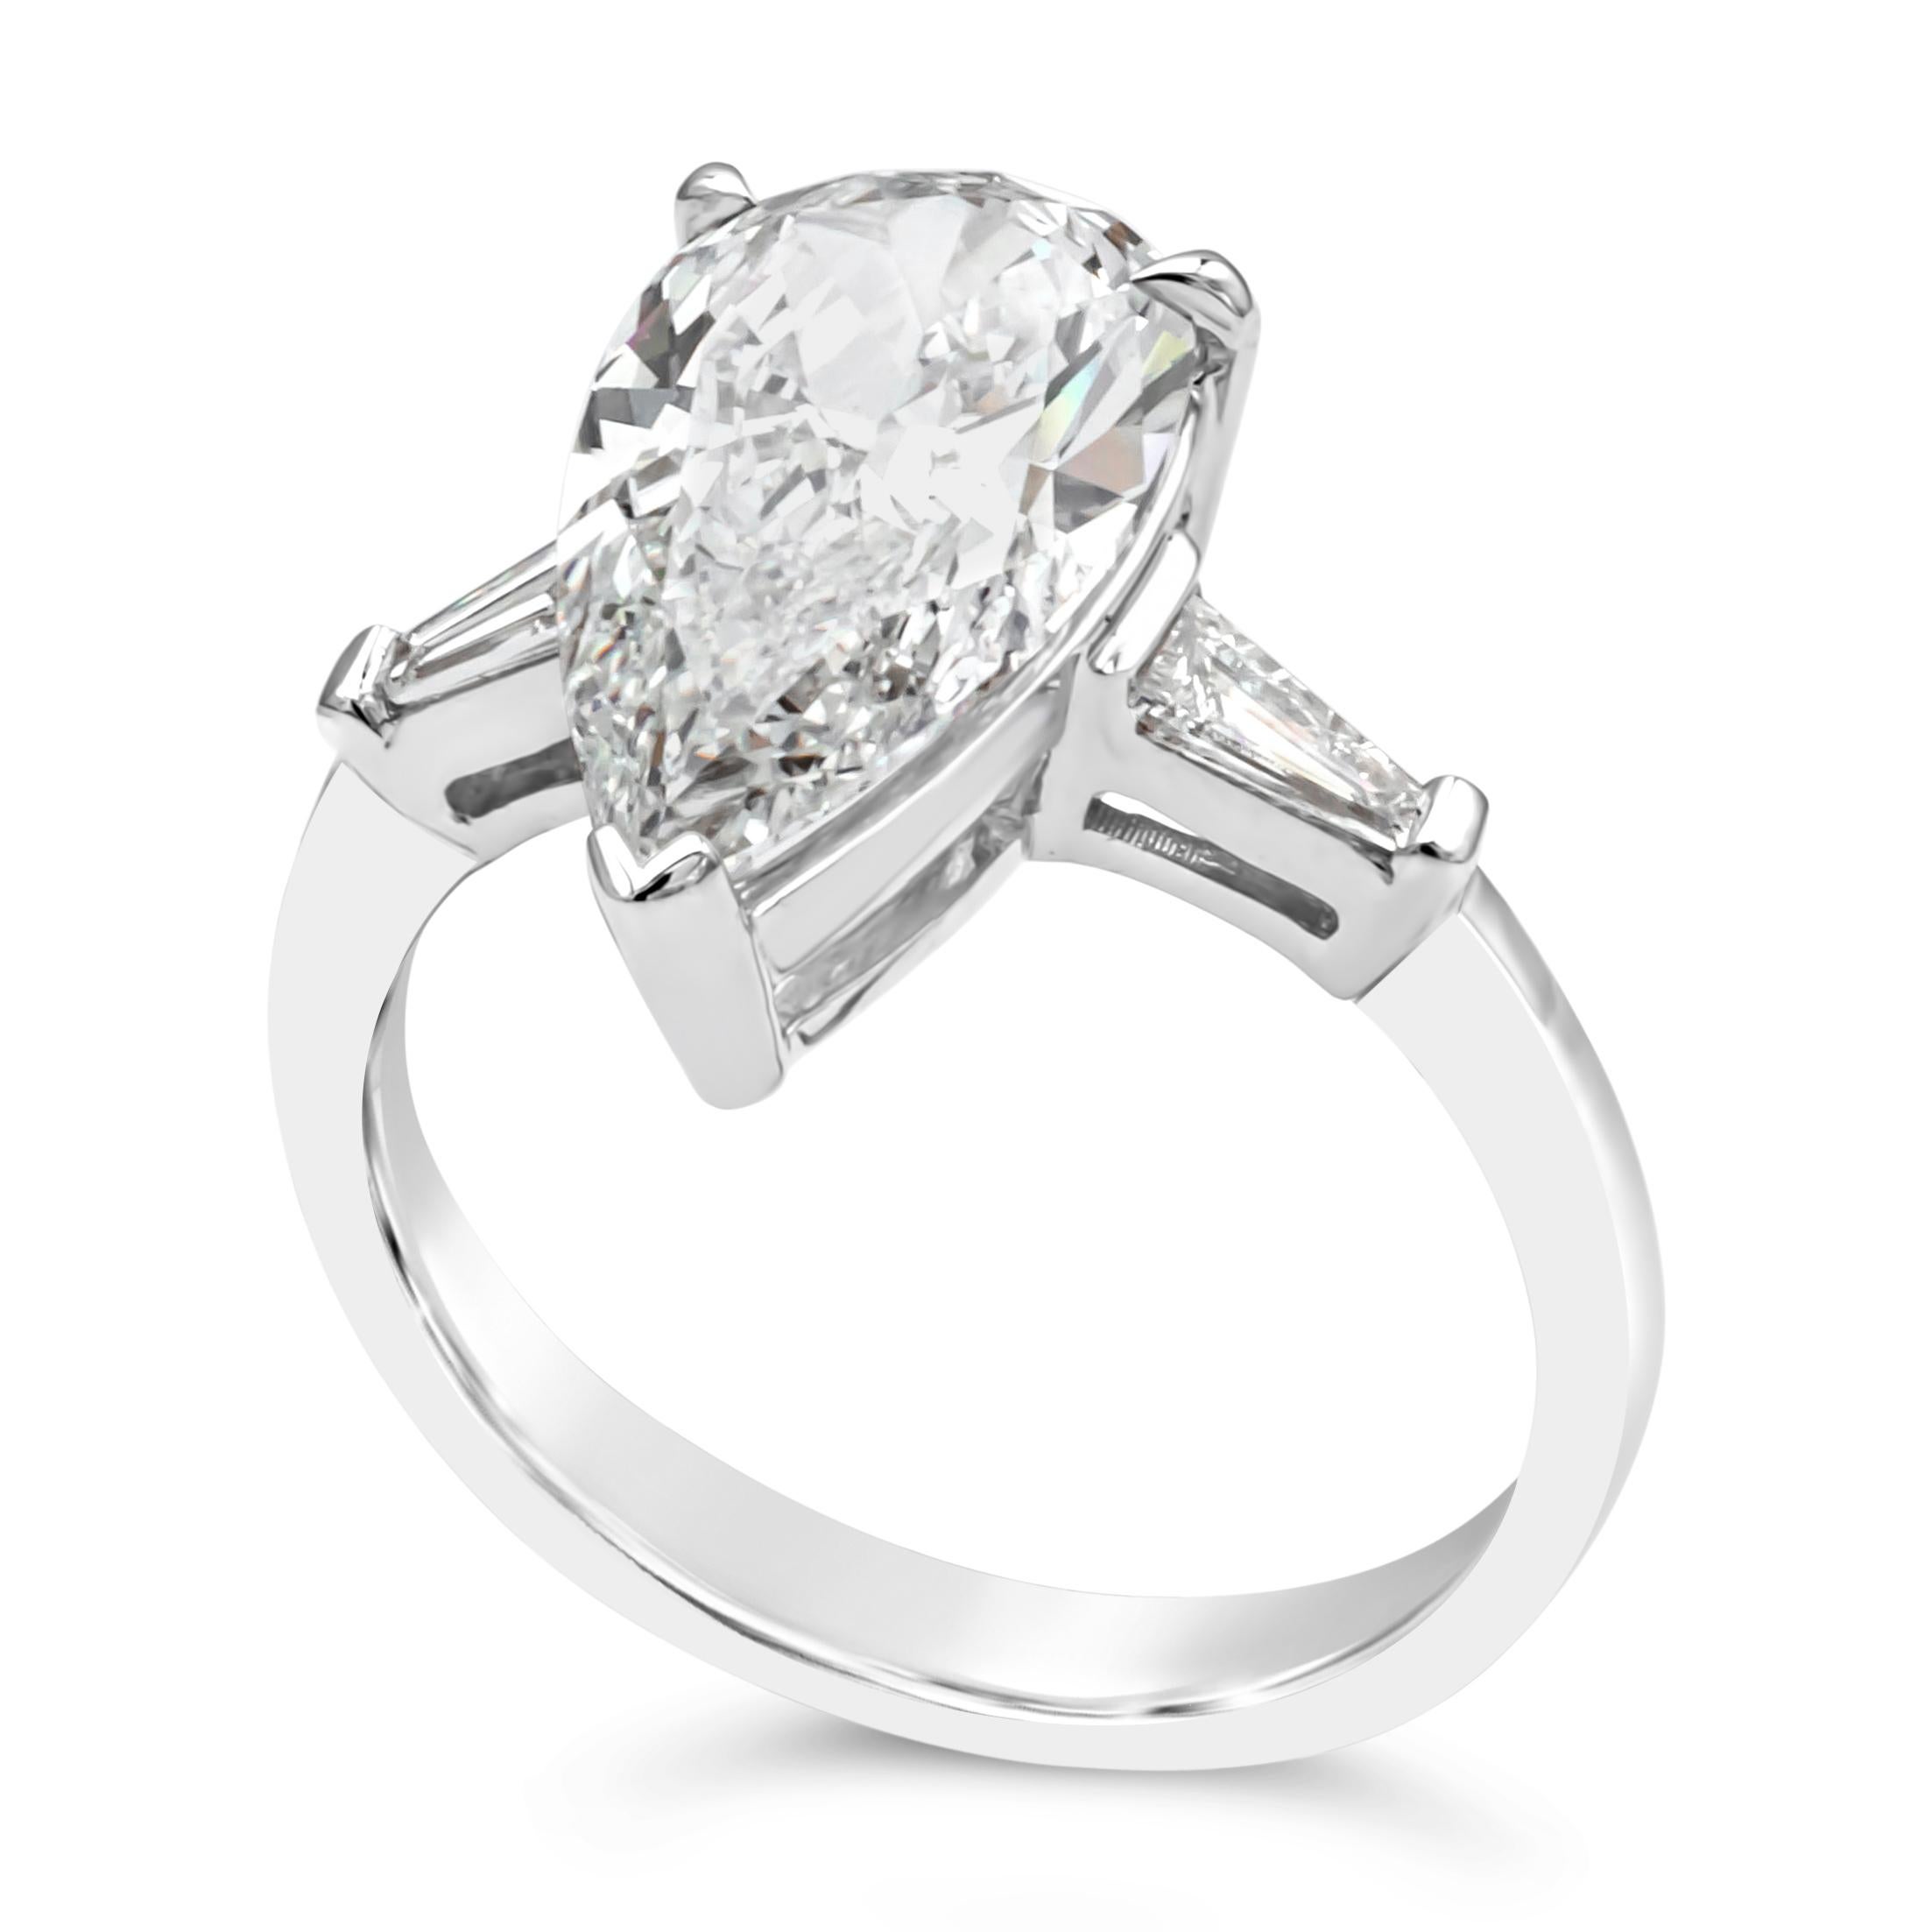 A brilliant and well crafted three stone engagement ring showcasing a GIA Certified pear shape center stone weighing 3.19 carats total, F Color and Si1 in Clarity. Elegantly flanked by tapered baguettes on each side weighing 0.30 carats. Finely made